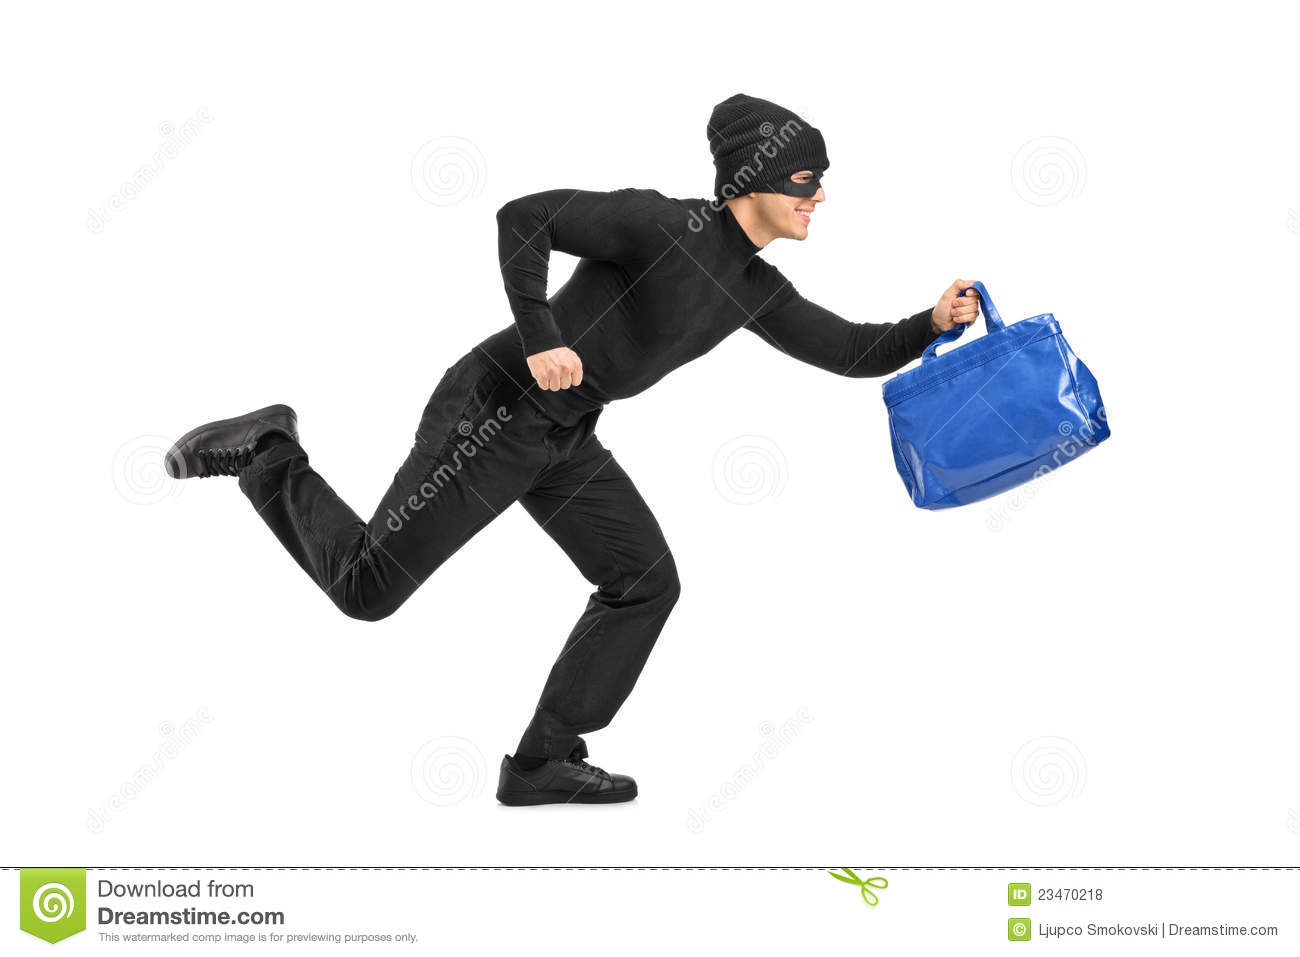 Full Length Portrait Of A Thief Running With A Stolen Purse On White